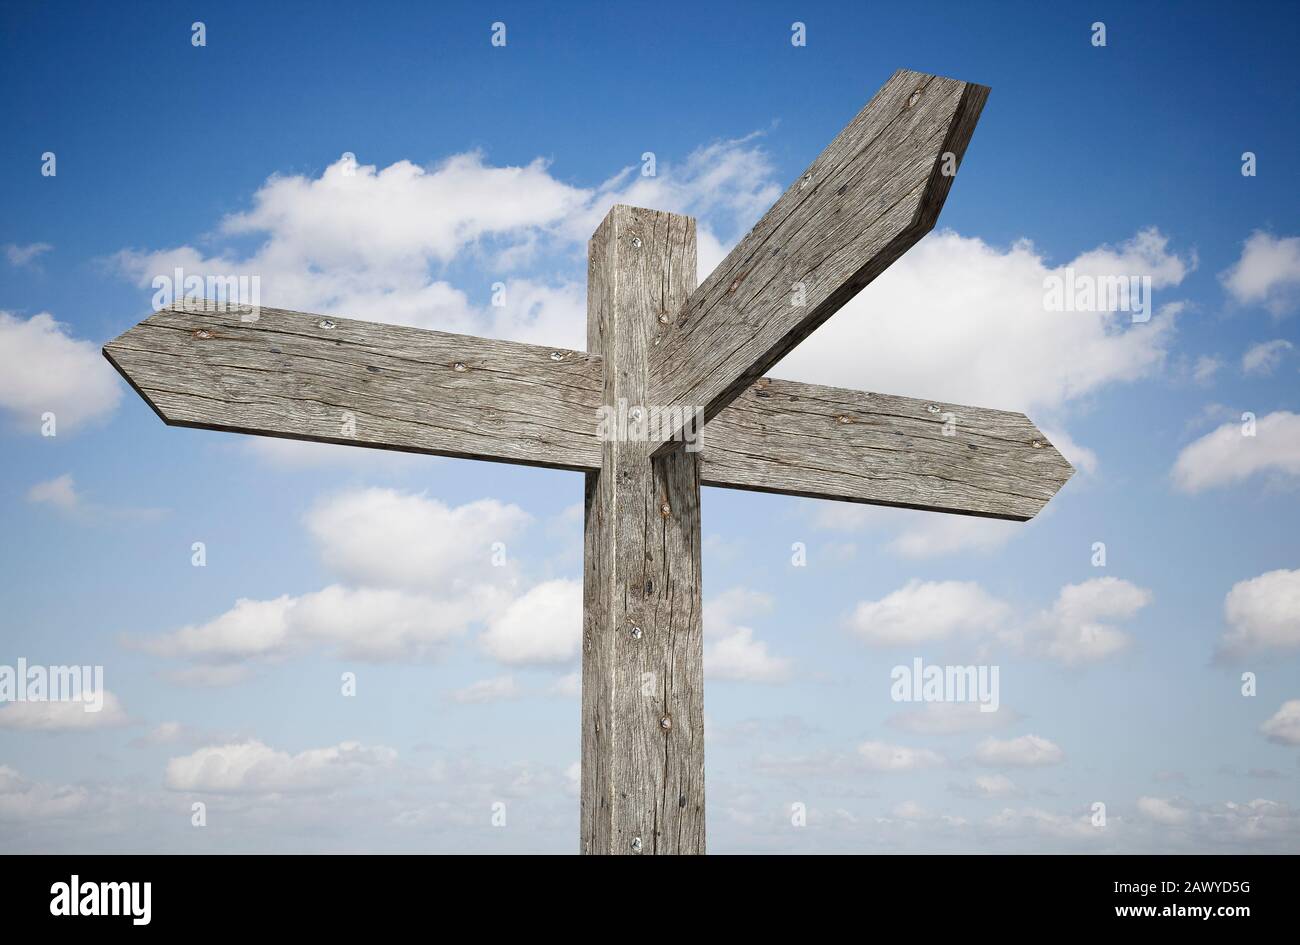 Blank three way wooden signpost against a blue sky Stock Photo